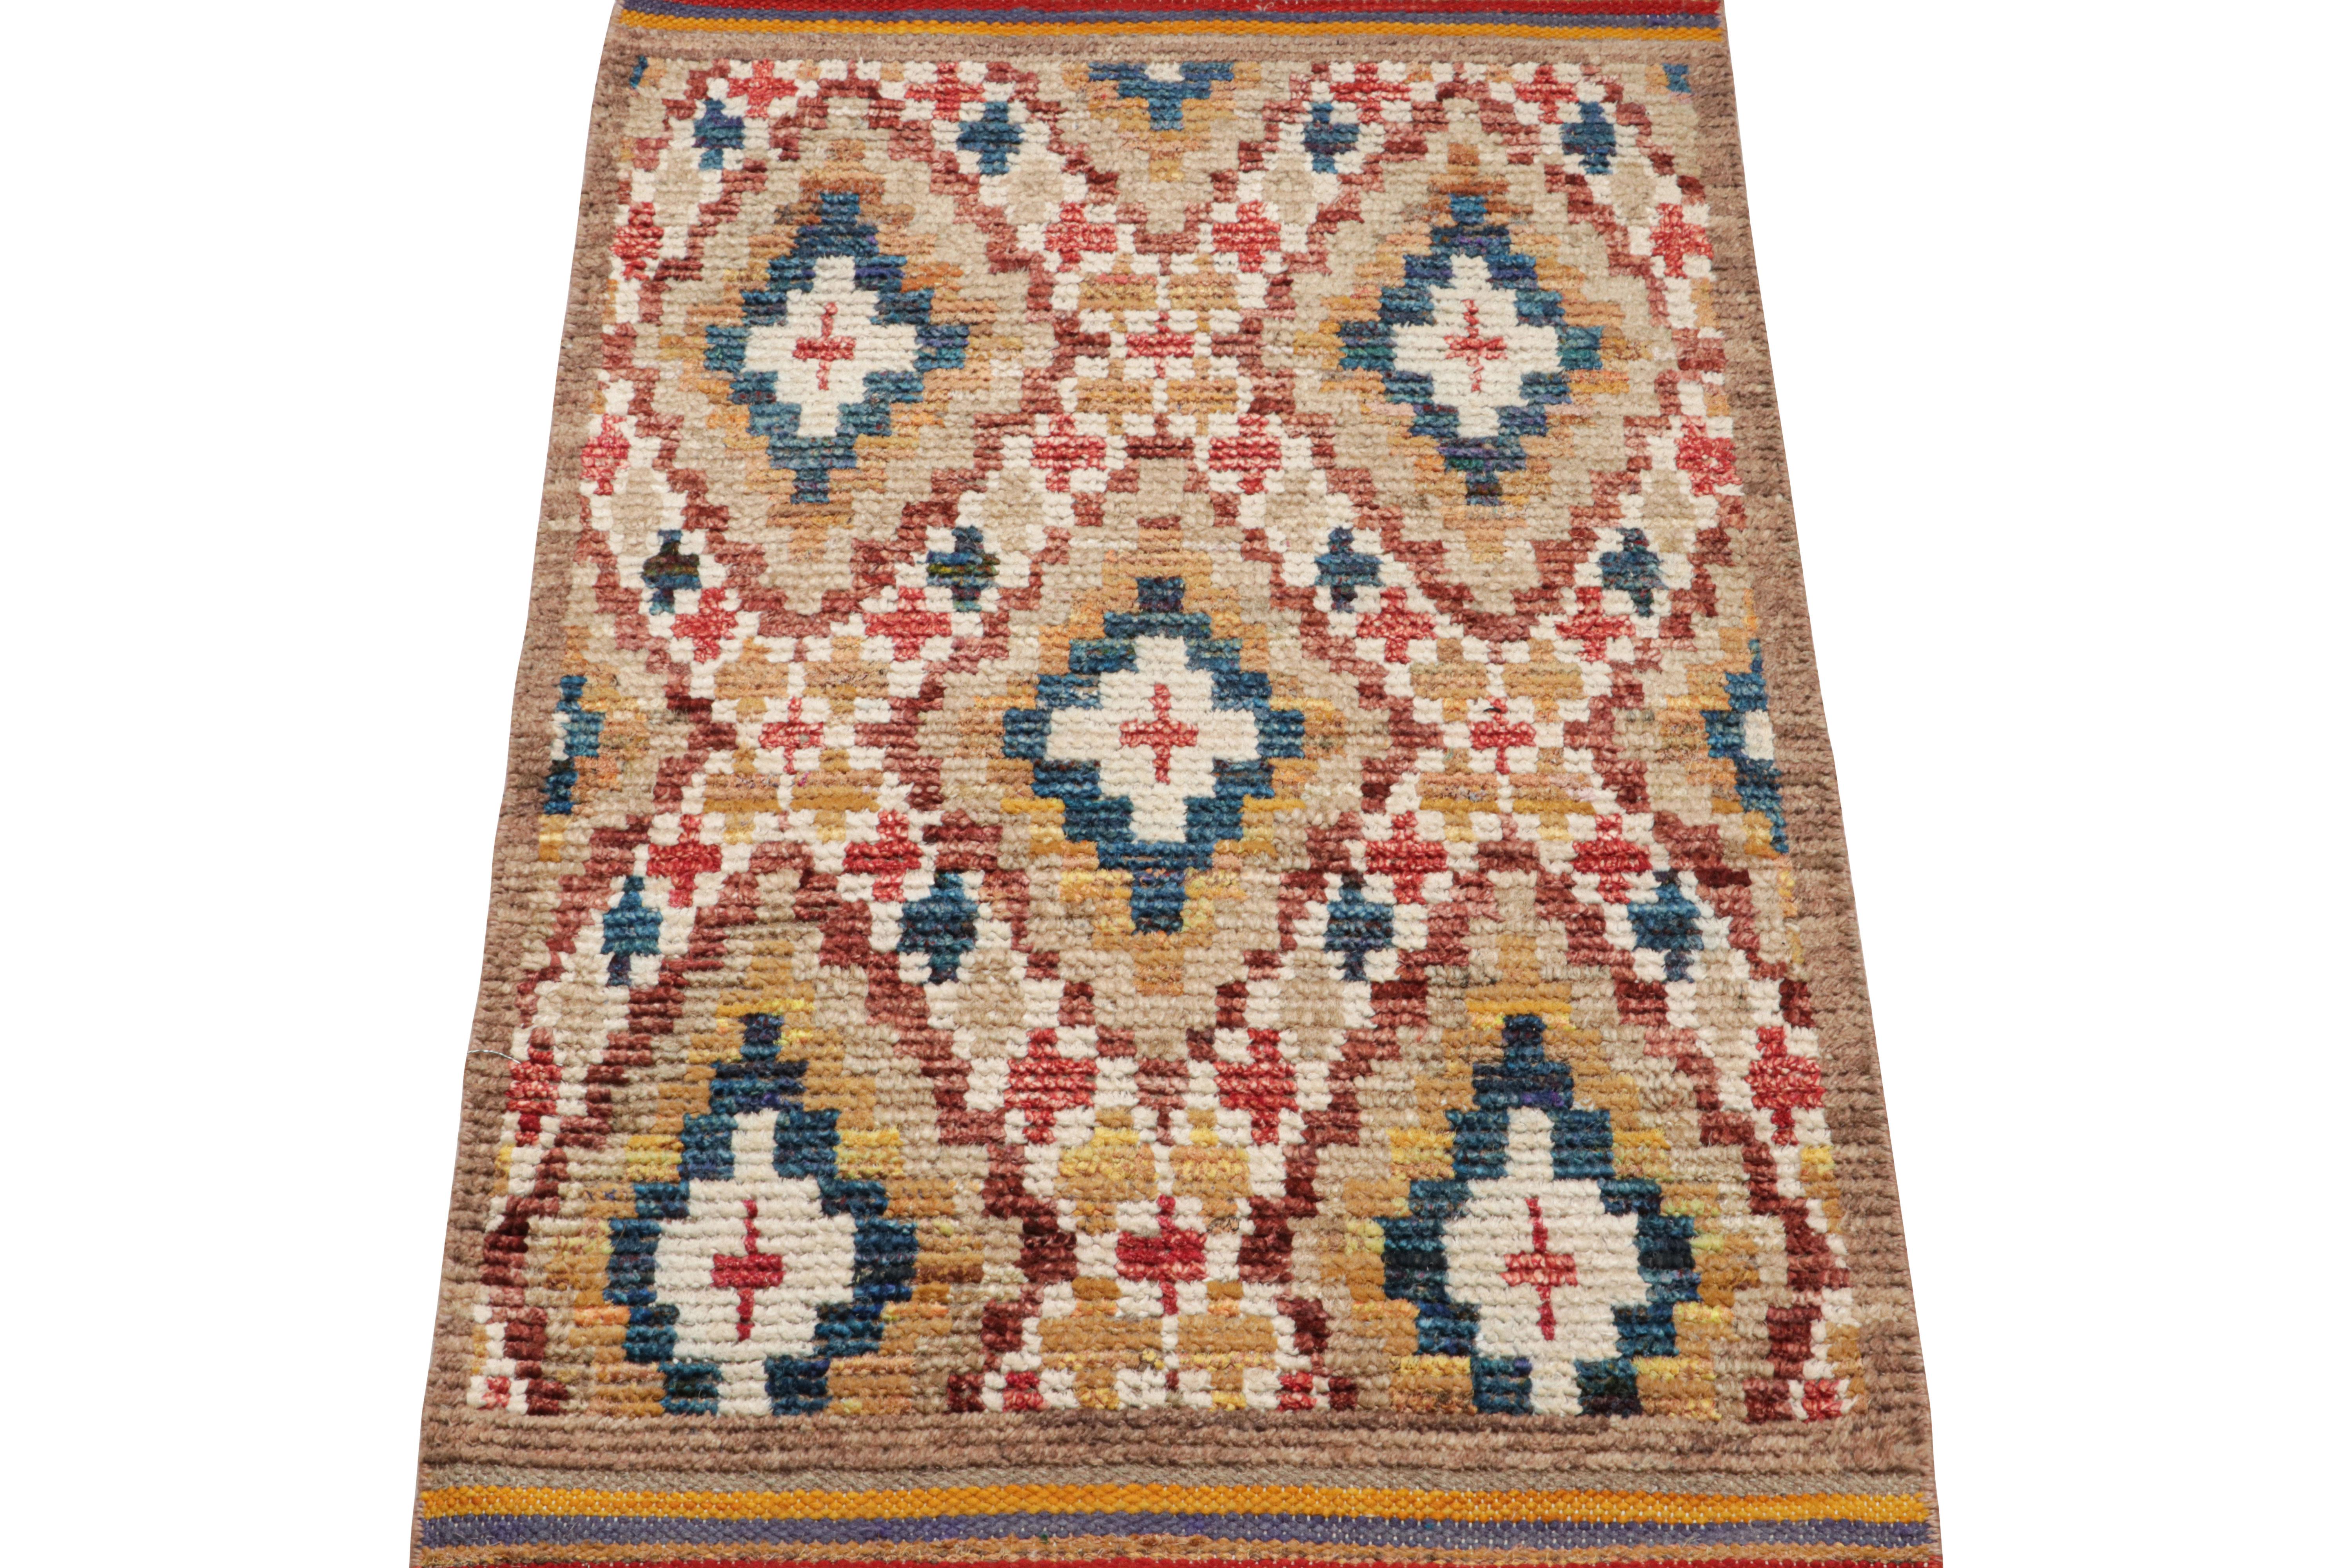 Hand-knotted in wool and silk, this 2x3 Moroccan rug features geometric patterns inspired by primitivist Berber weaving traditions and same ribbed texture drawing on Boucherouite sensibilities. 

On the Design: 

Connoisseurs may admire the subtle